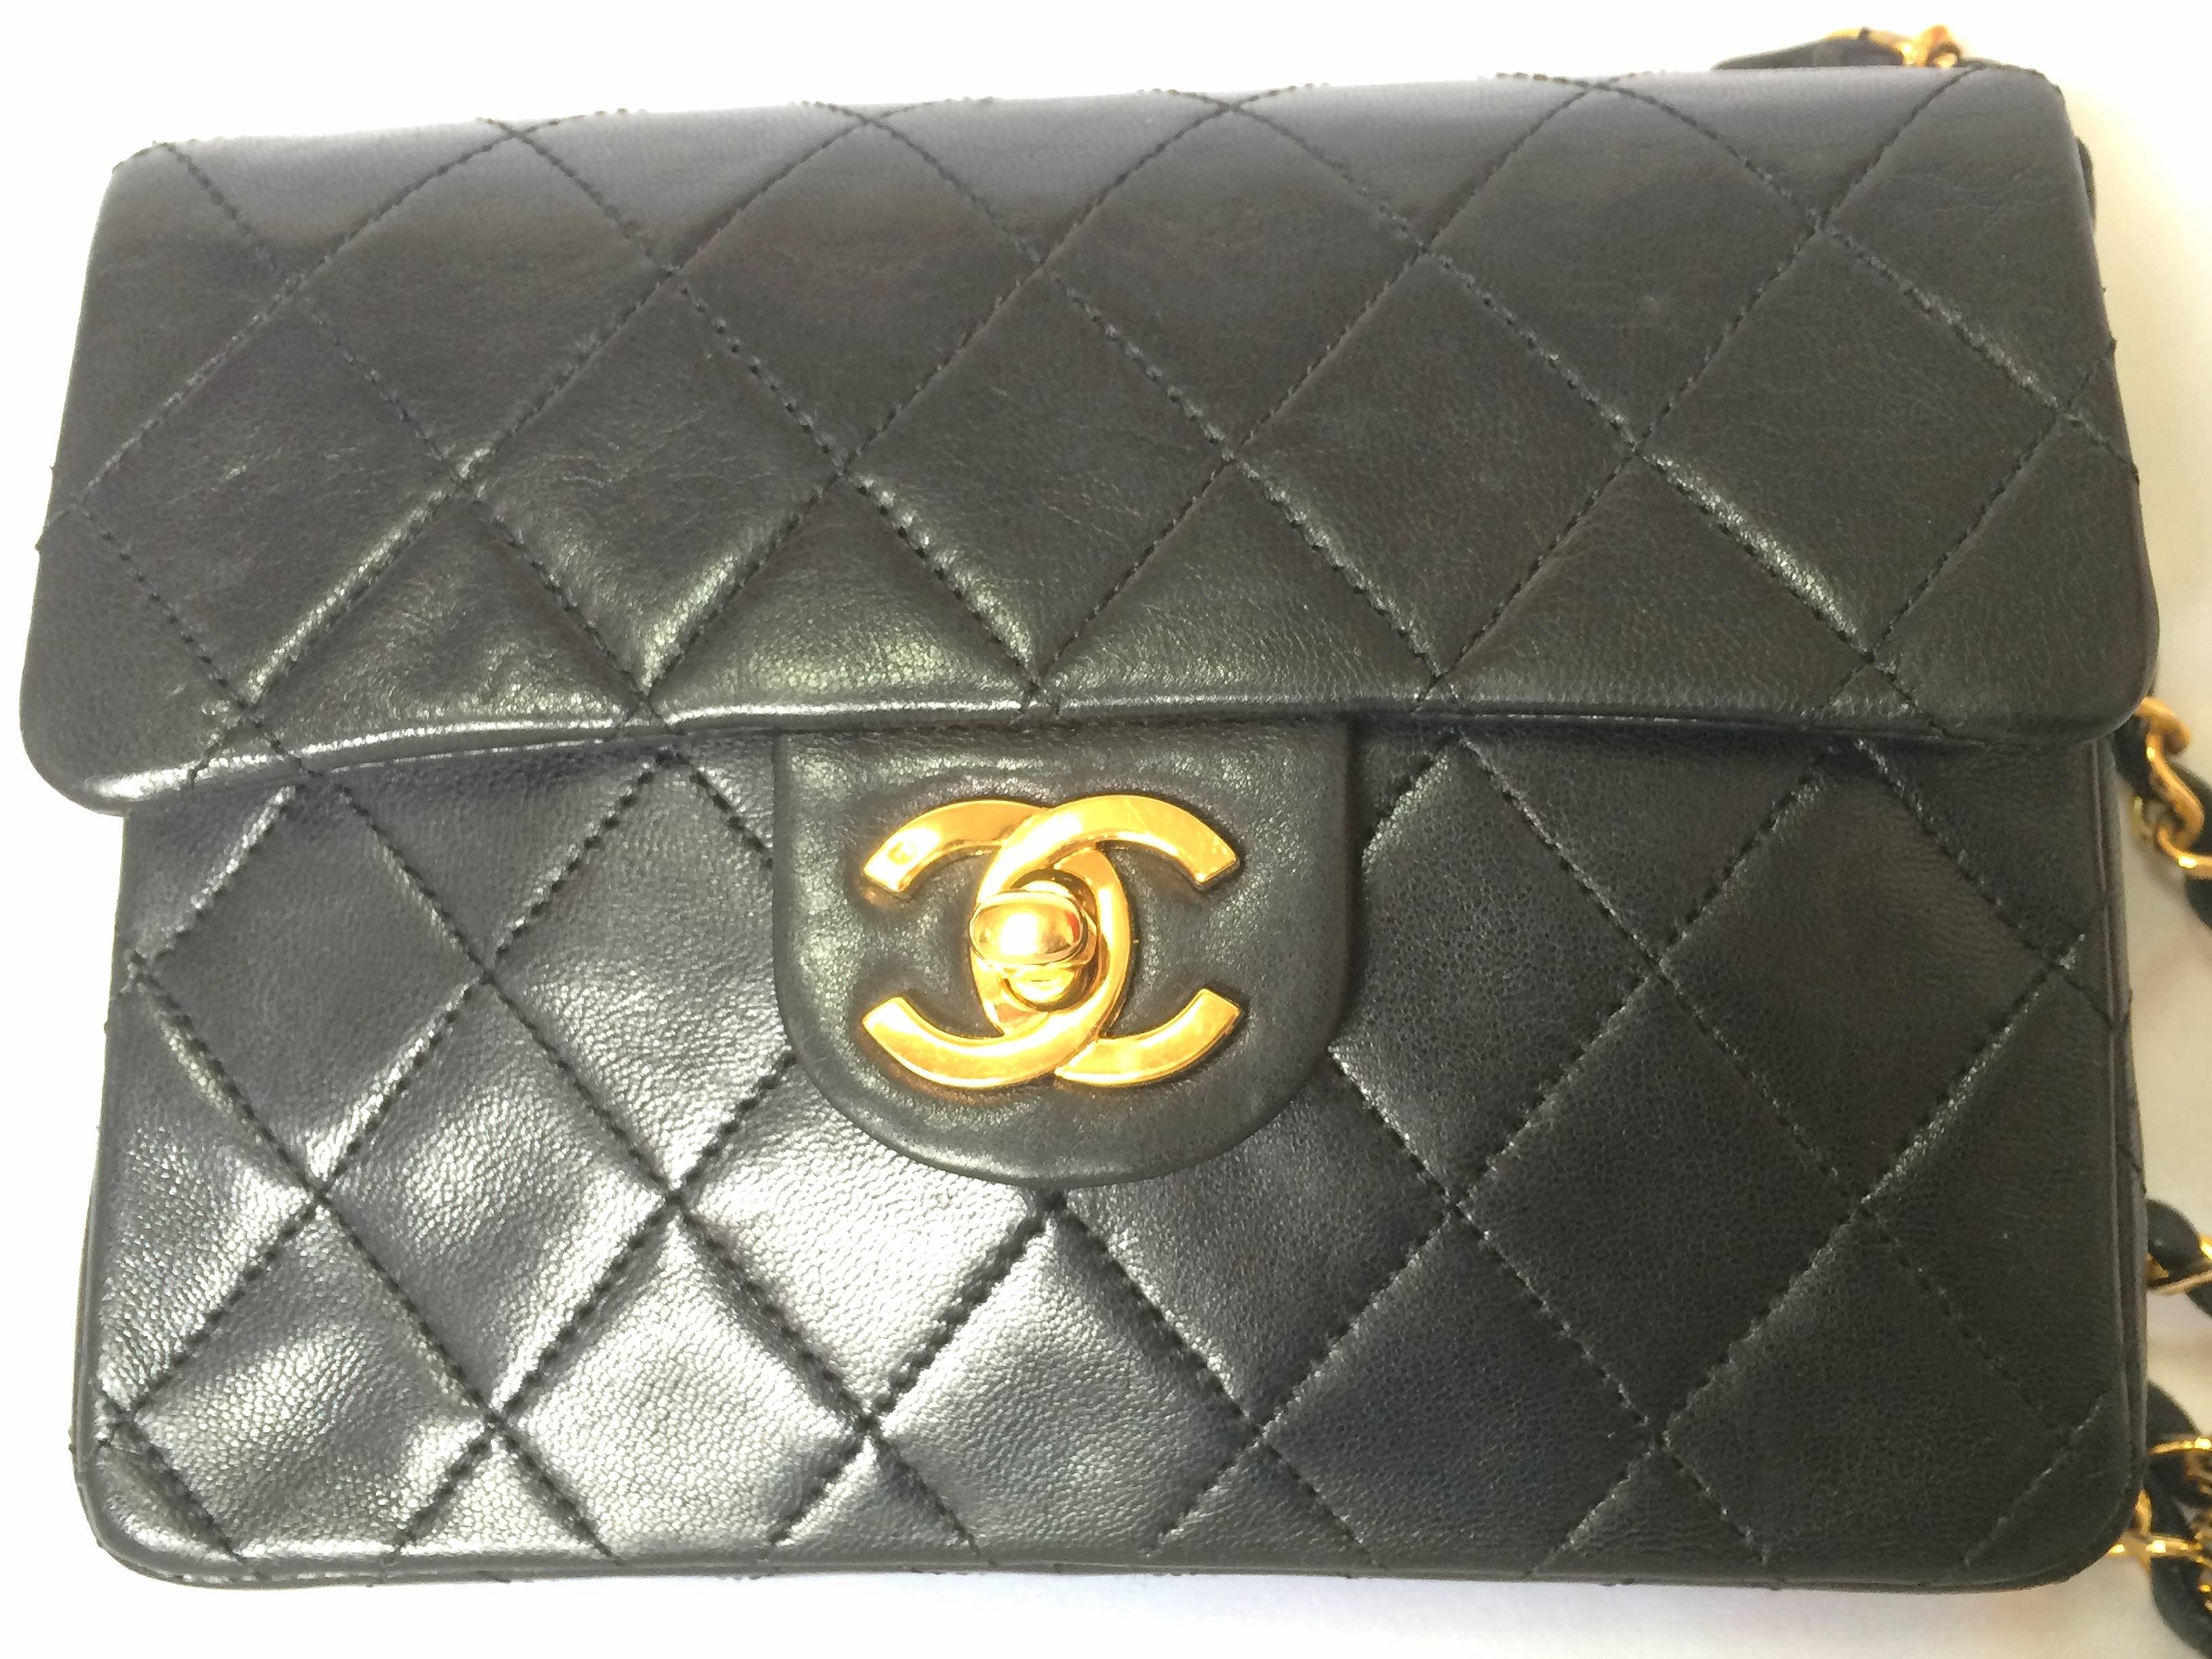 1980's vintage CHANEL black lamb leather flap chain shoulder bag, classic 2.55 mini purse with gold tone CC closure.

Vintage CHANEL black color lambskin classic 2.55 mini shoulder bag with golden chains and cc closure.

Introducing one of the